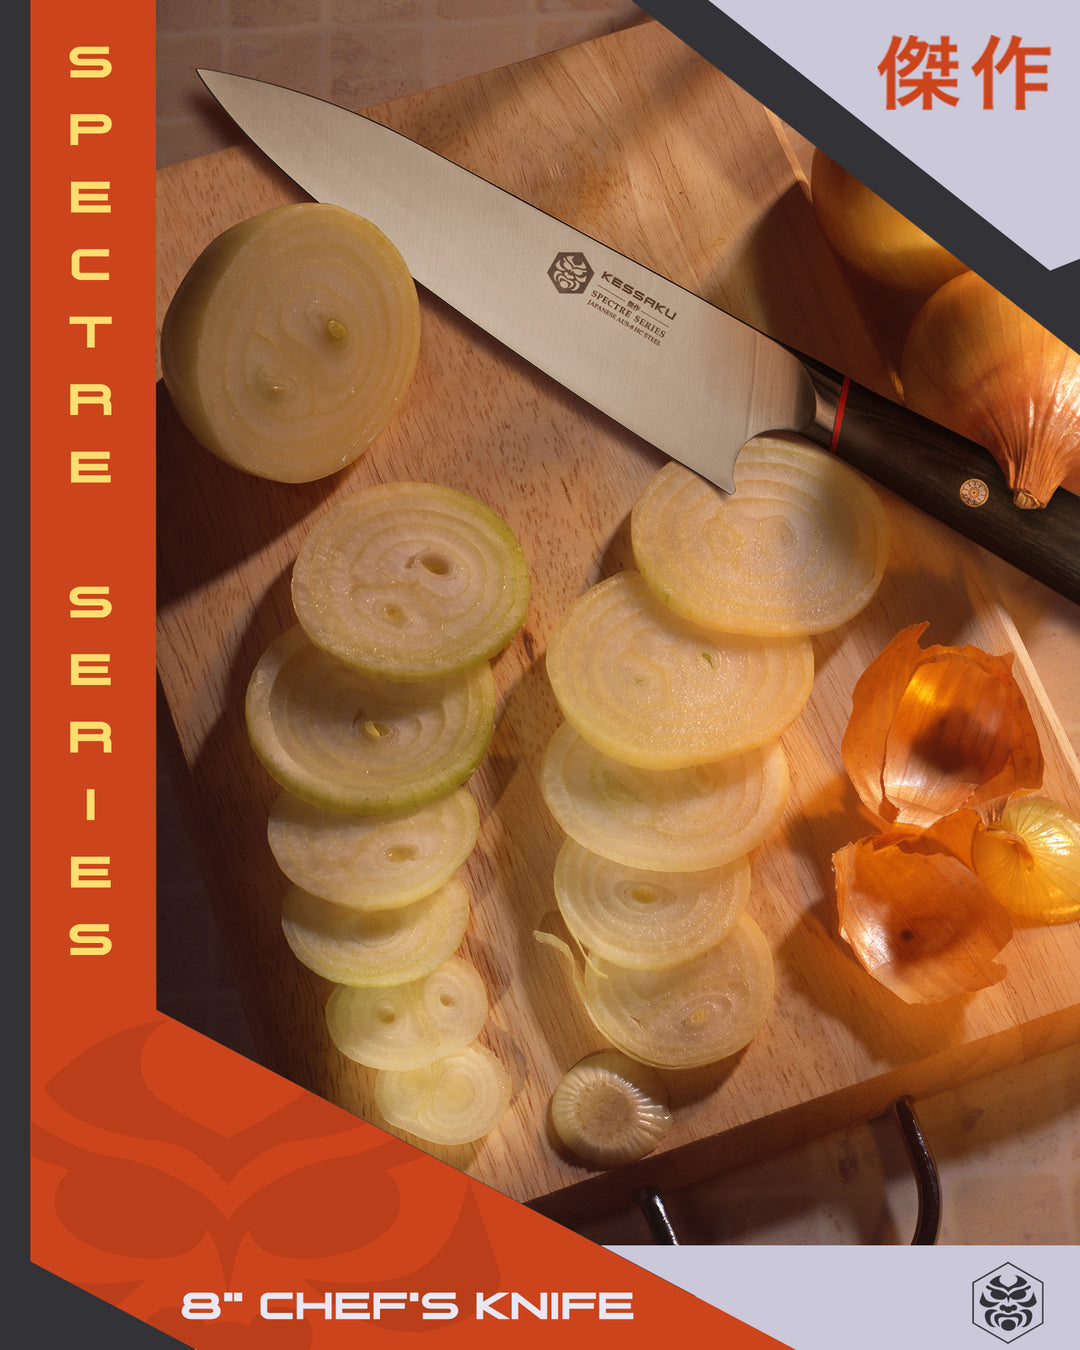 The Spectre Chef's Knife on a cutting board with sliced yellow onions.